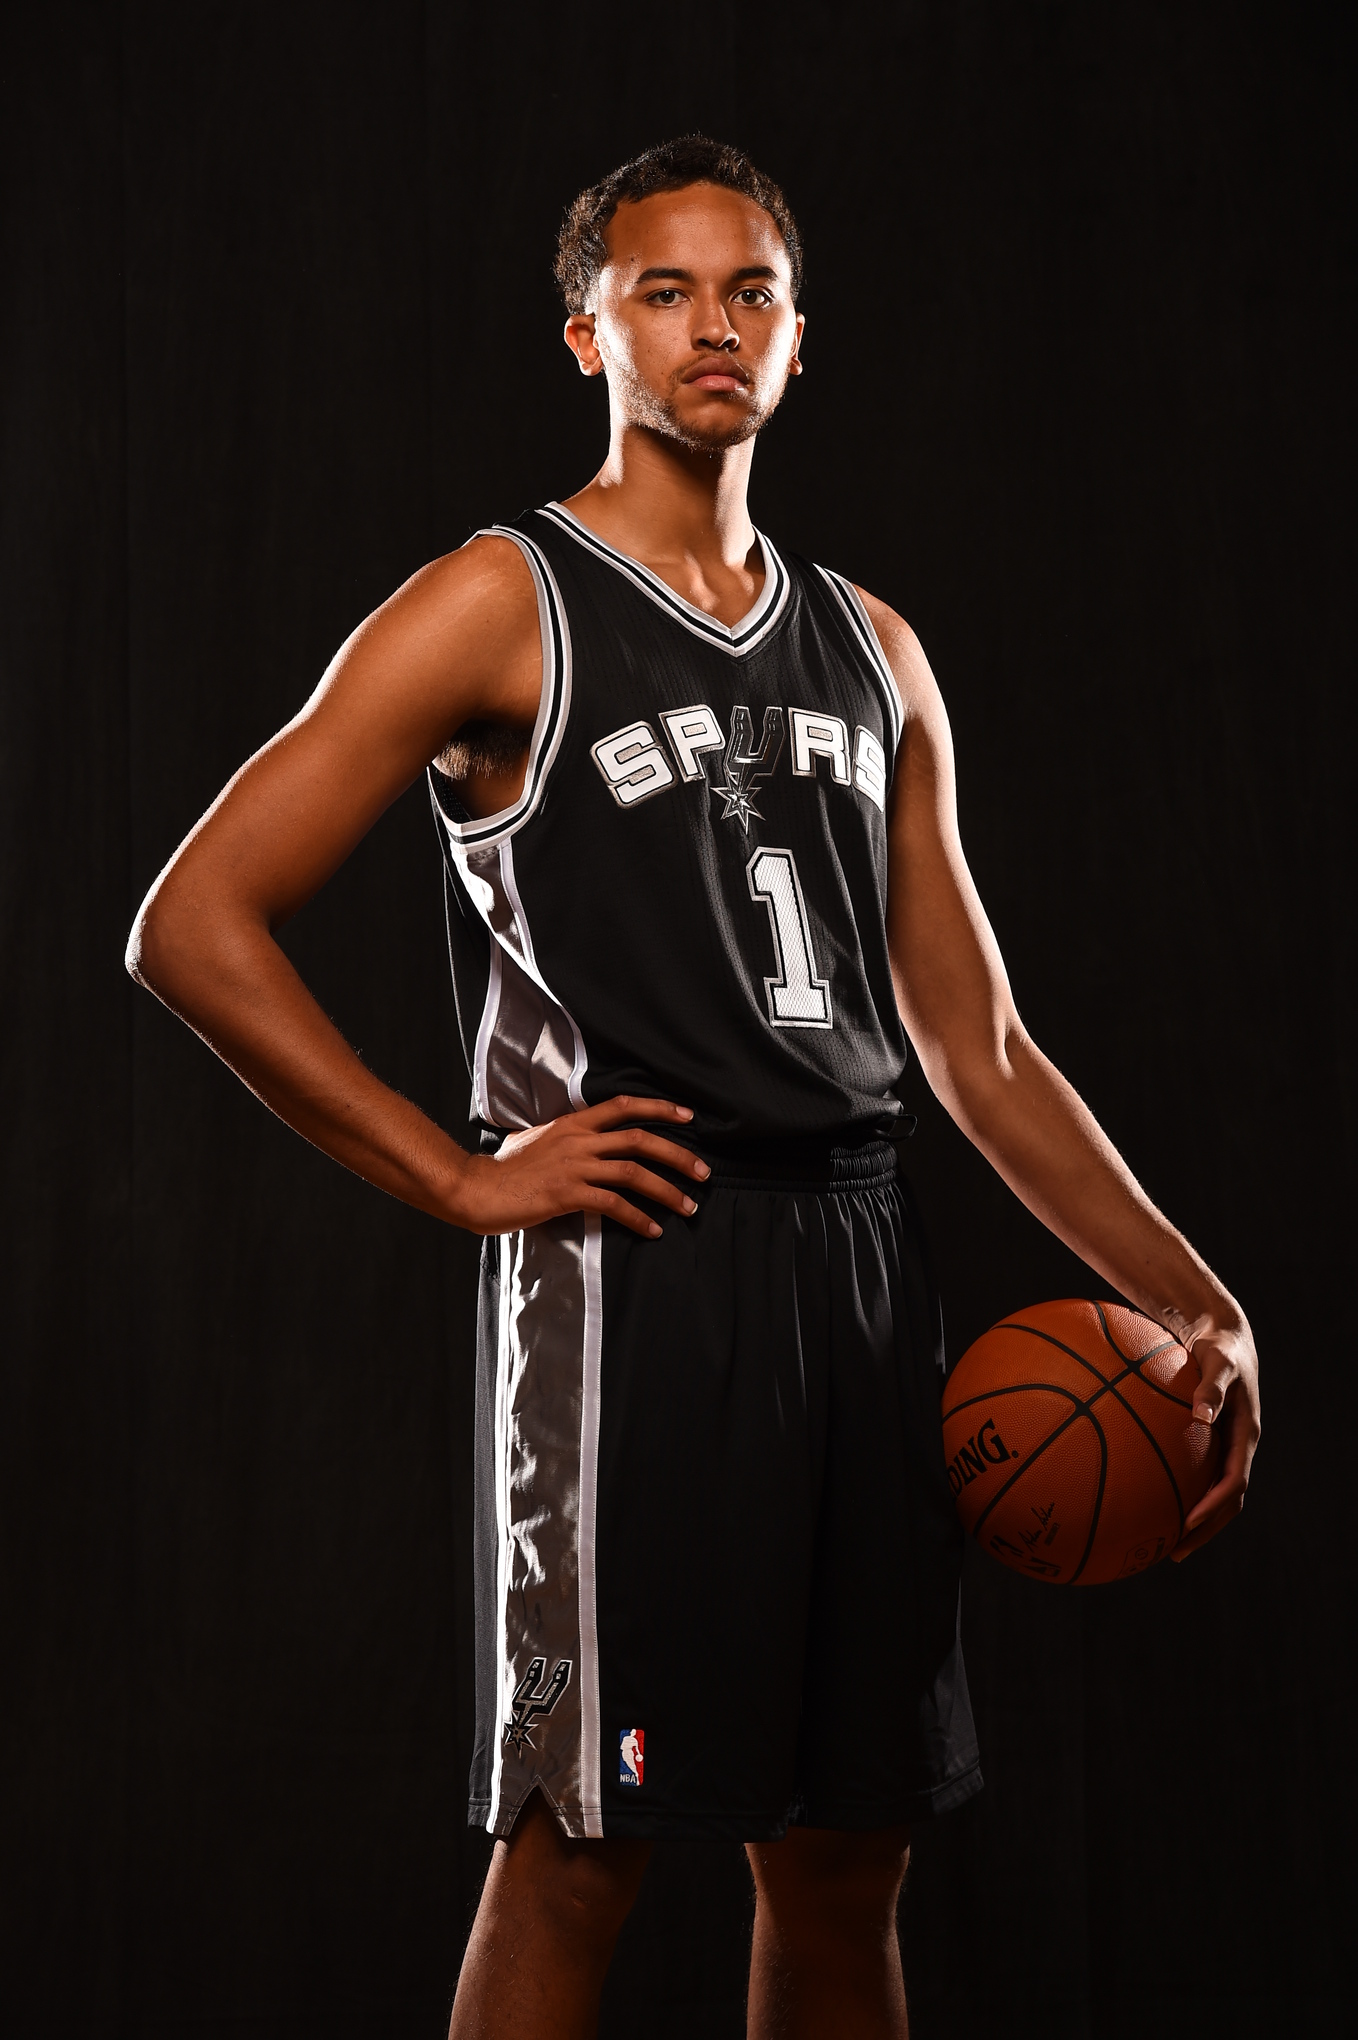 Kyle-anderson-nba-rookie-day-4